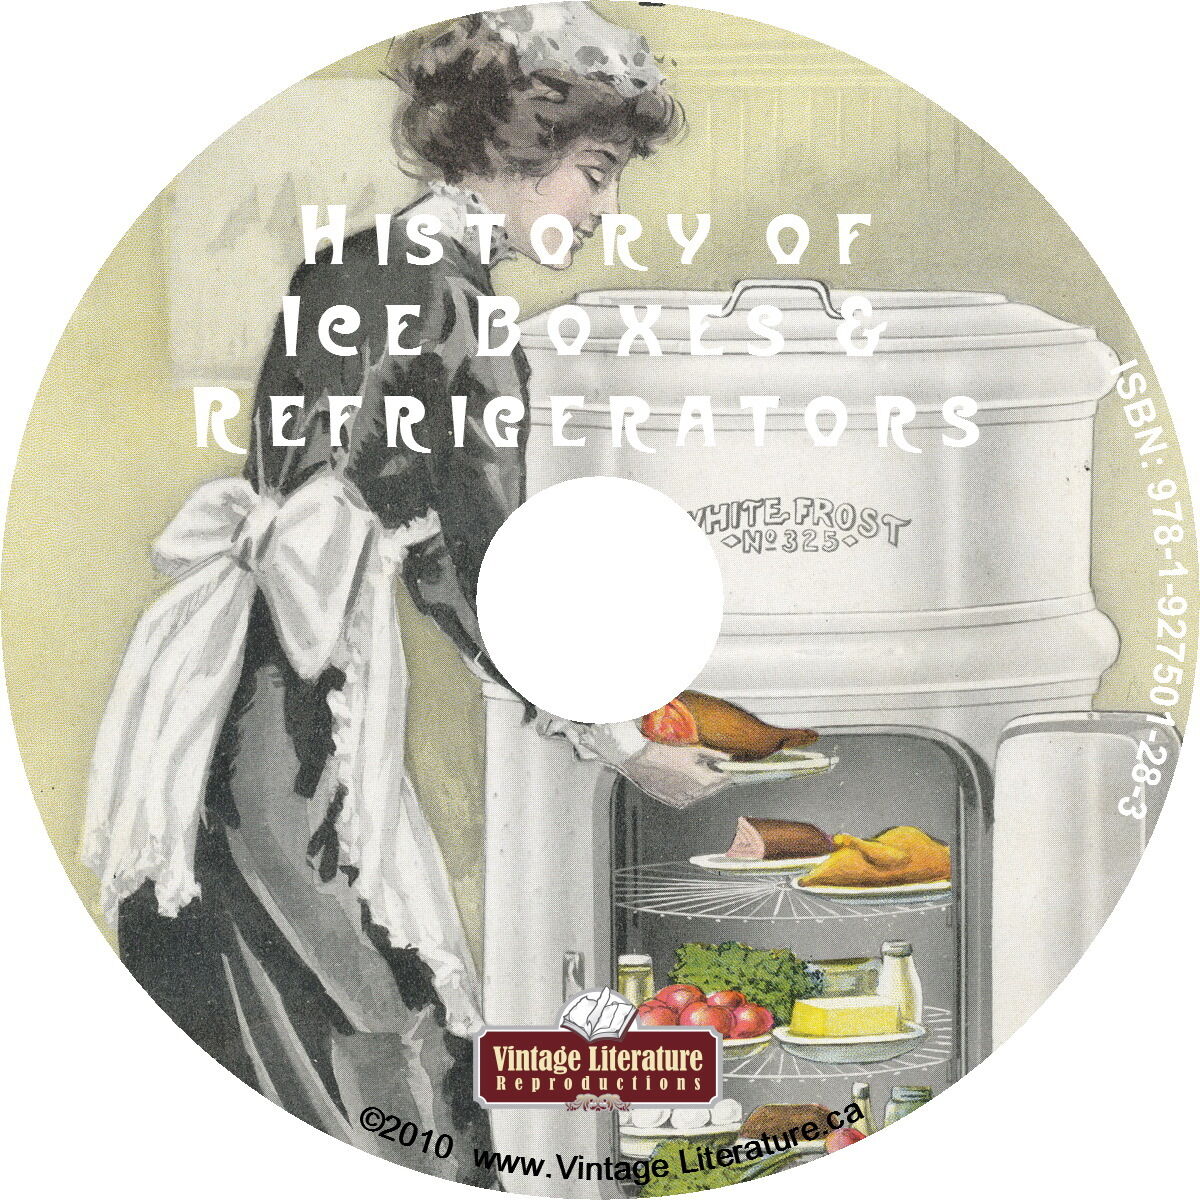 History of Ice Boxes & Refrigerators {Antique Catalogs & Manuals}  on DVD